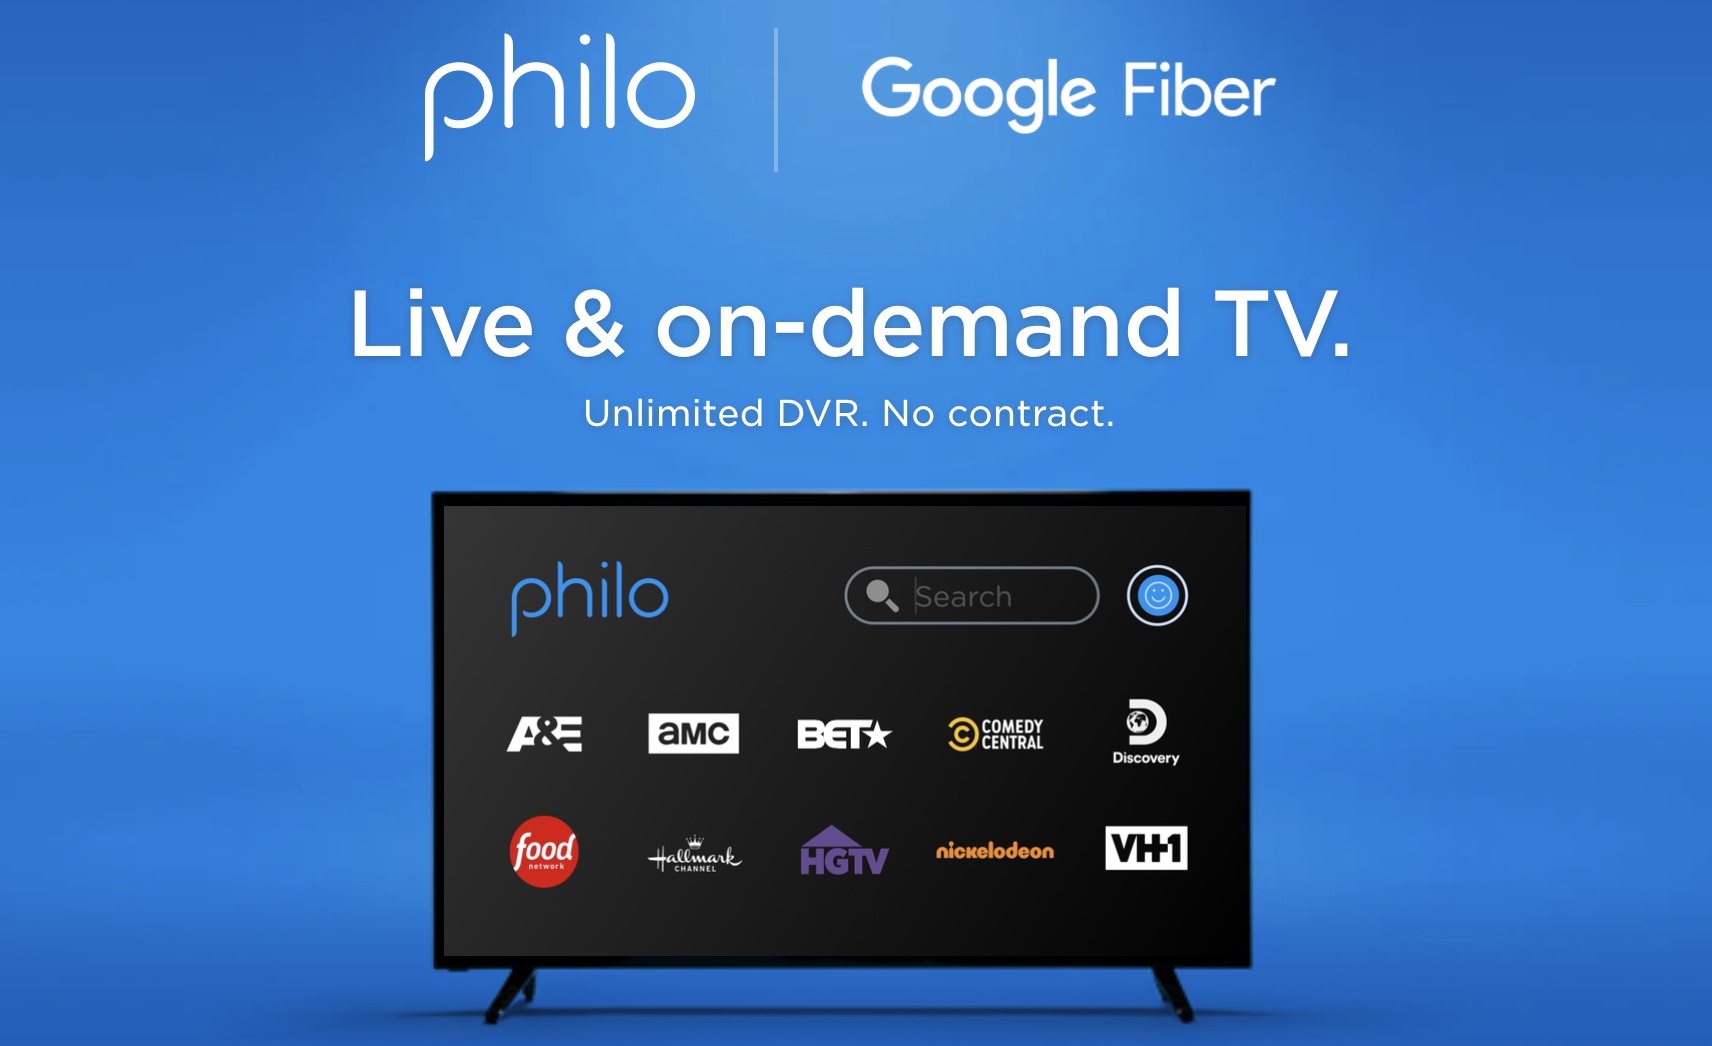 Google Fiber Adds Philo Streaming As An Option Next To Youtube And Fubo Wilson S Media - jennie bp solo remix roblox id roblox music code youtube